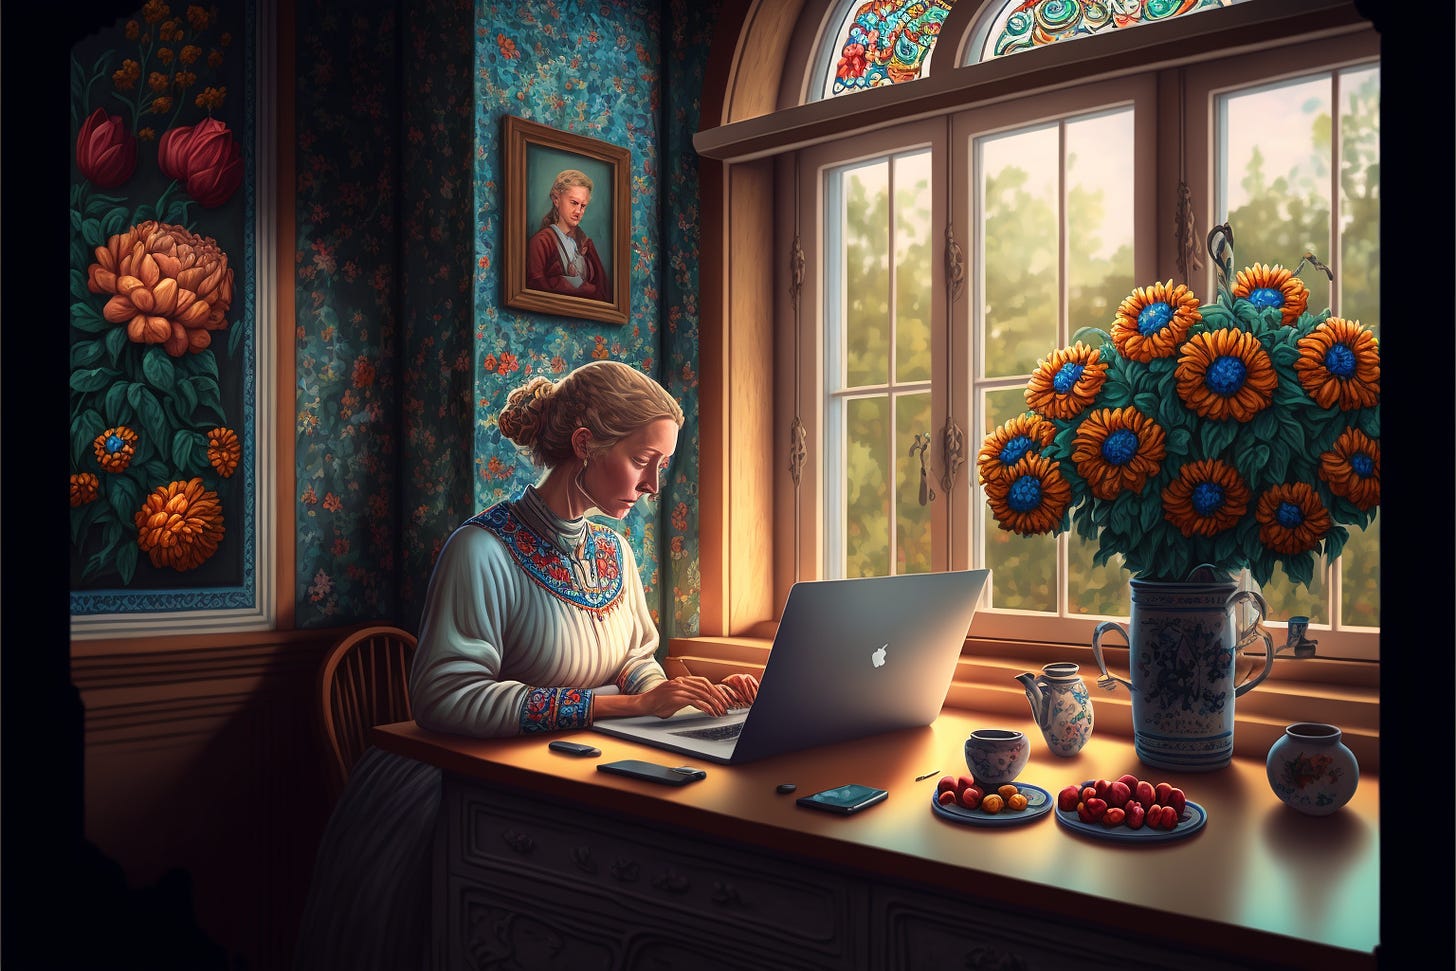 mom working on her laptop at her window tesk, surrounded by flowers, beautiful ceramics, and the portrait of her grandma watching from above